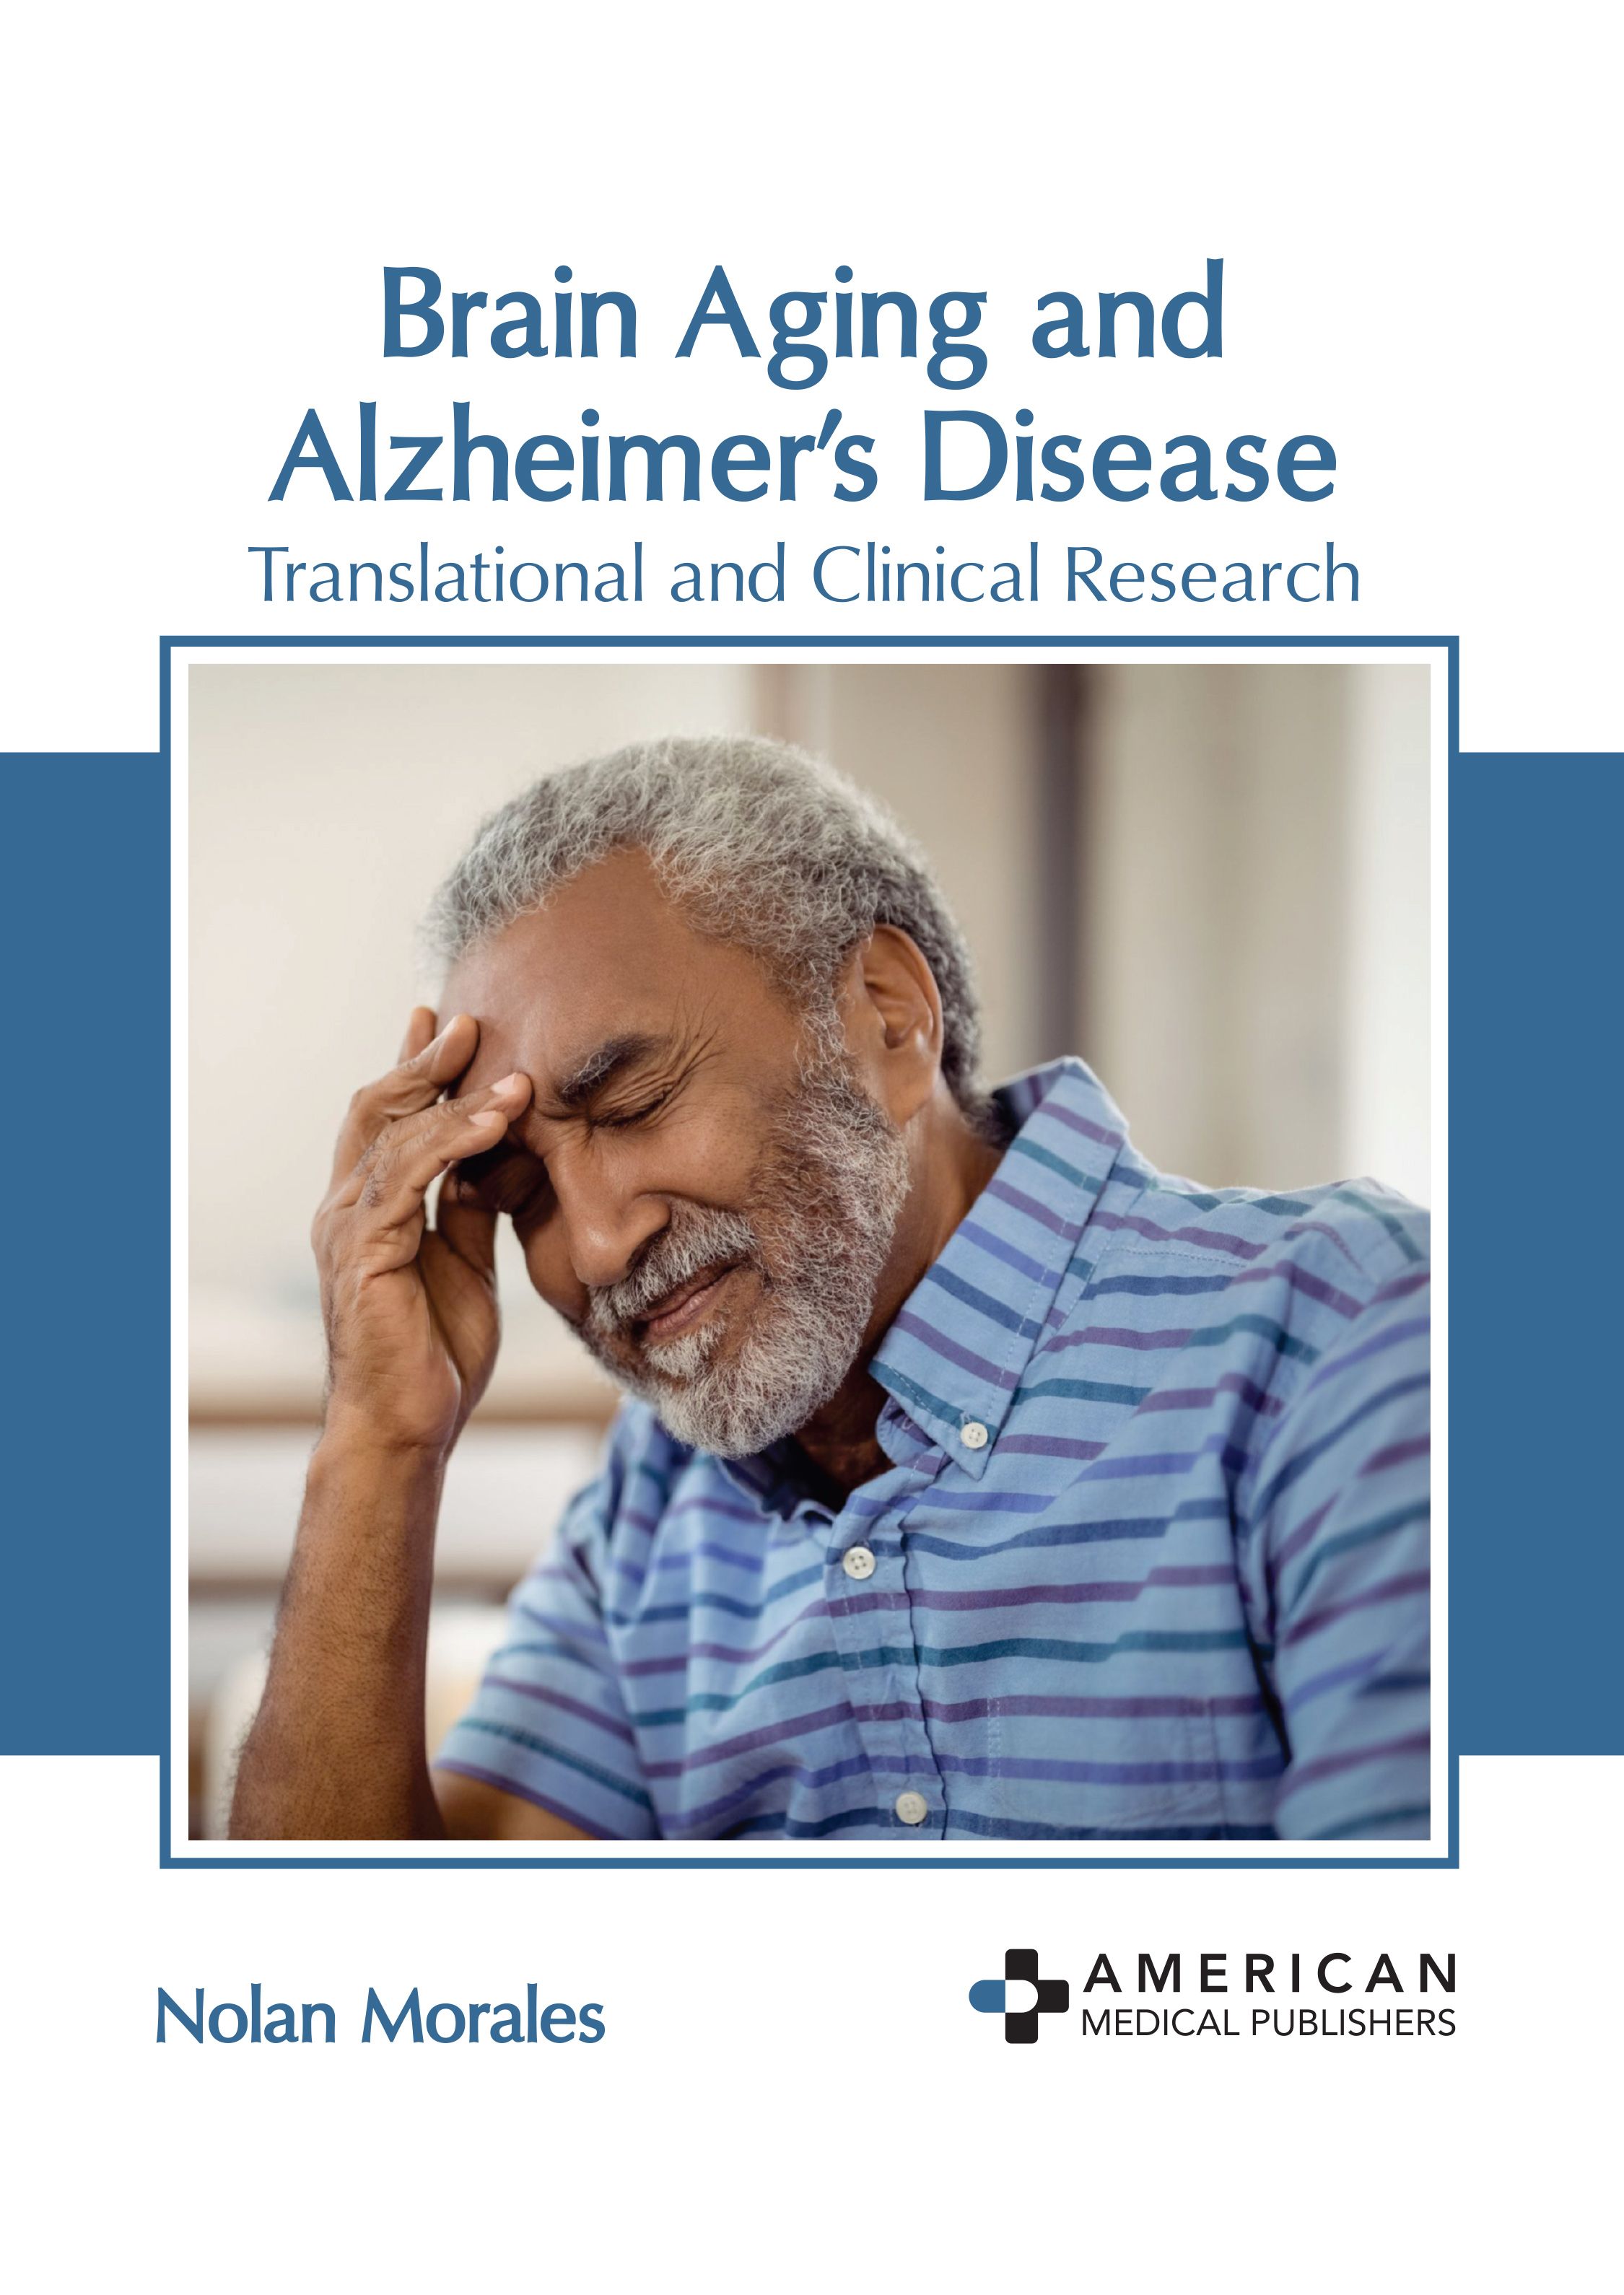 BRAIN AGING AND ALZHEIMER’S DISEASE: TRANSLATIONAL AND CLINICAL RESEARCH